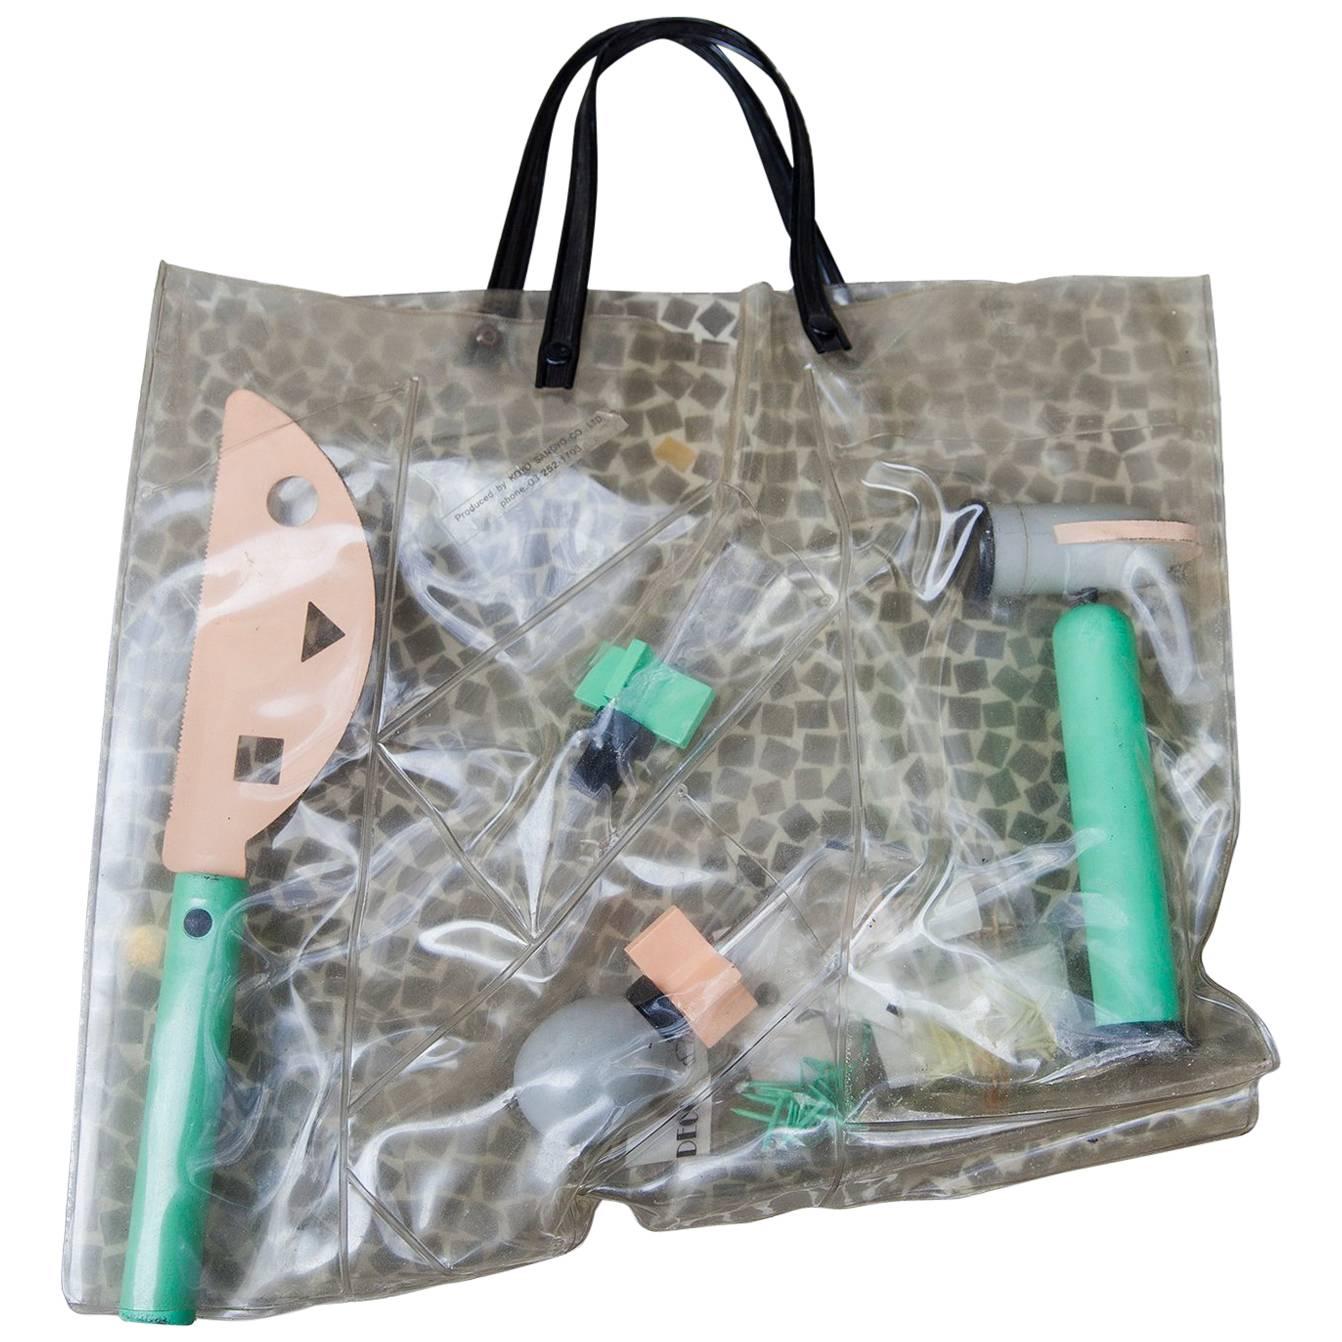 Rare tool kit designed by Koyo Sangyo, Japan, 1980s.
This complete set represents the 'Memphis' period and includes: a handsaws, a Hammer, two screwdrivers and five packages of nails all in the original plastic bag.
The typical soft colors used are